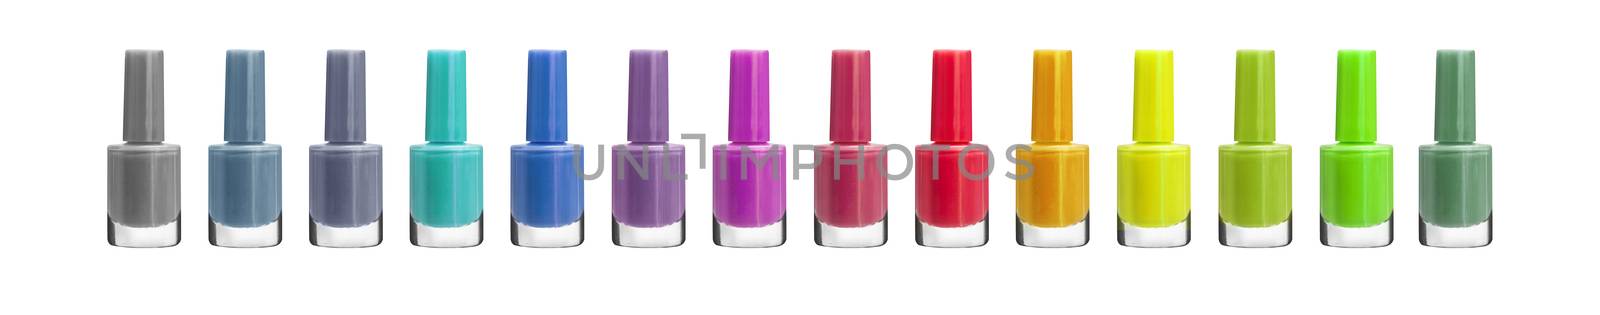 Group of bright color nail polishes isolated on white background